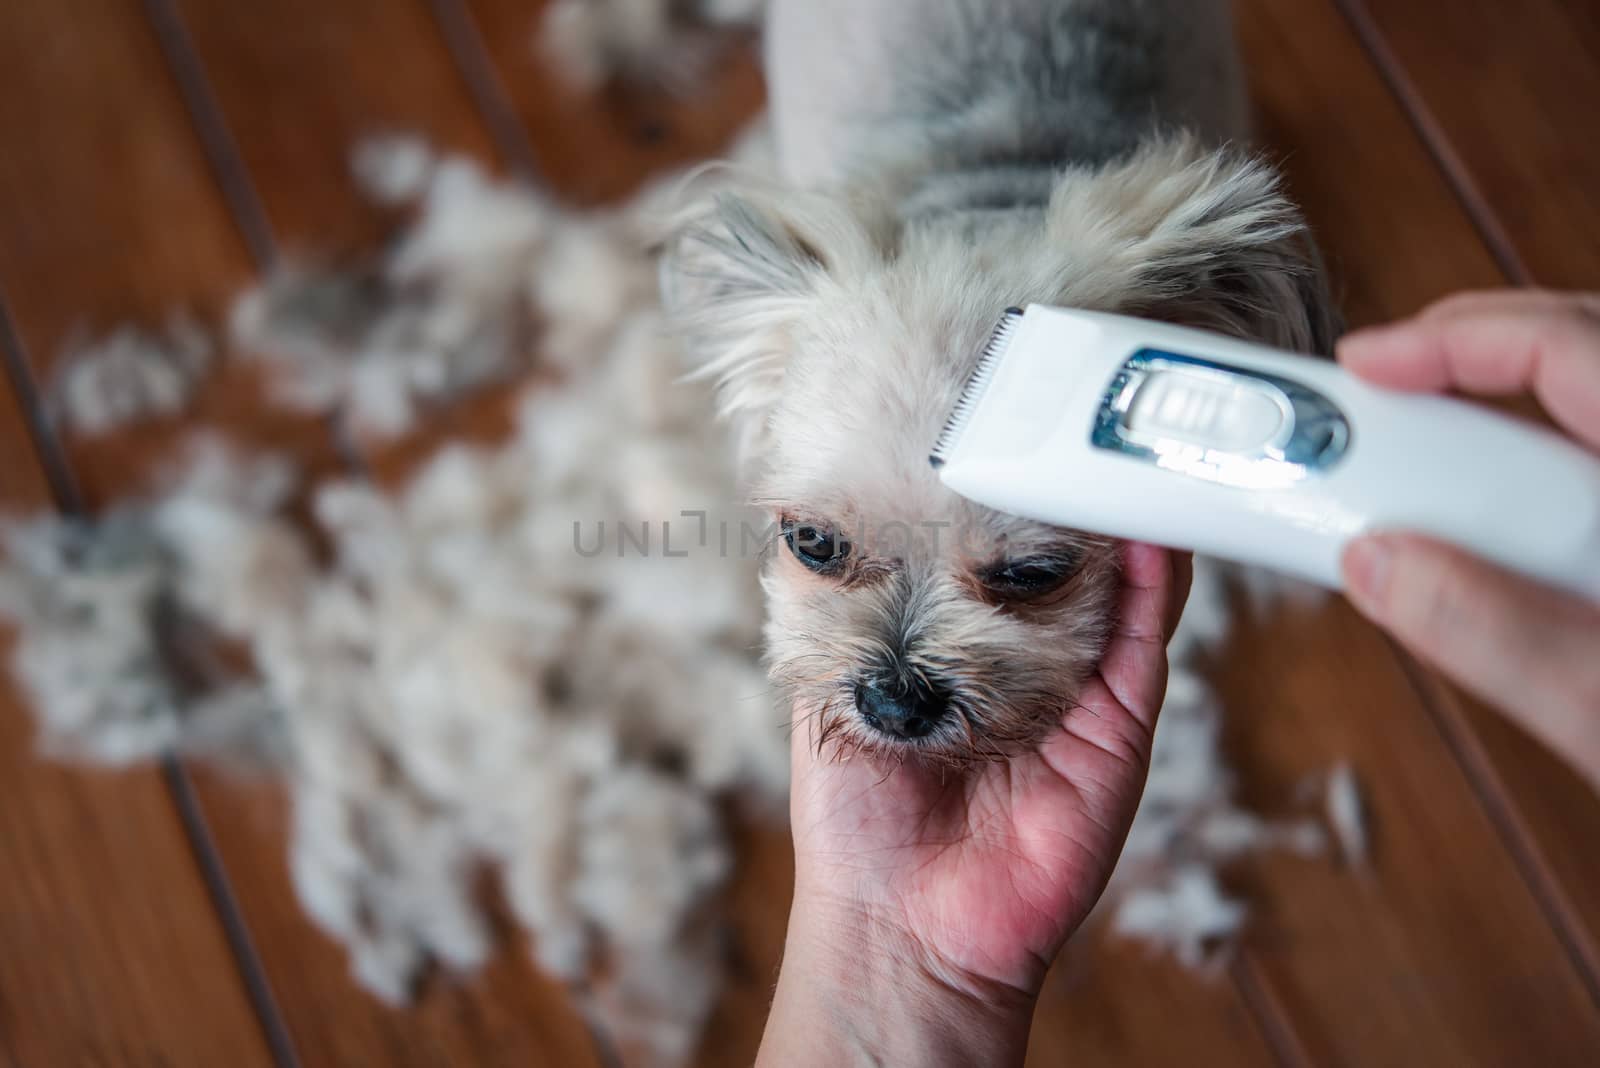 Grooming and haircut the dog fur of beige dog so cute mixed breed with Shih-Tzu, Pomeranian and Poodle by human with dog clipper